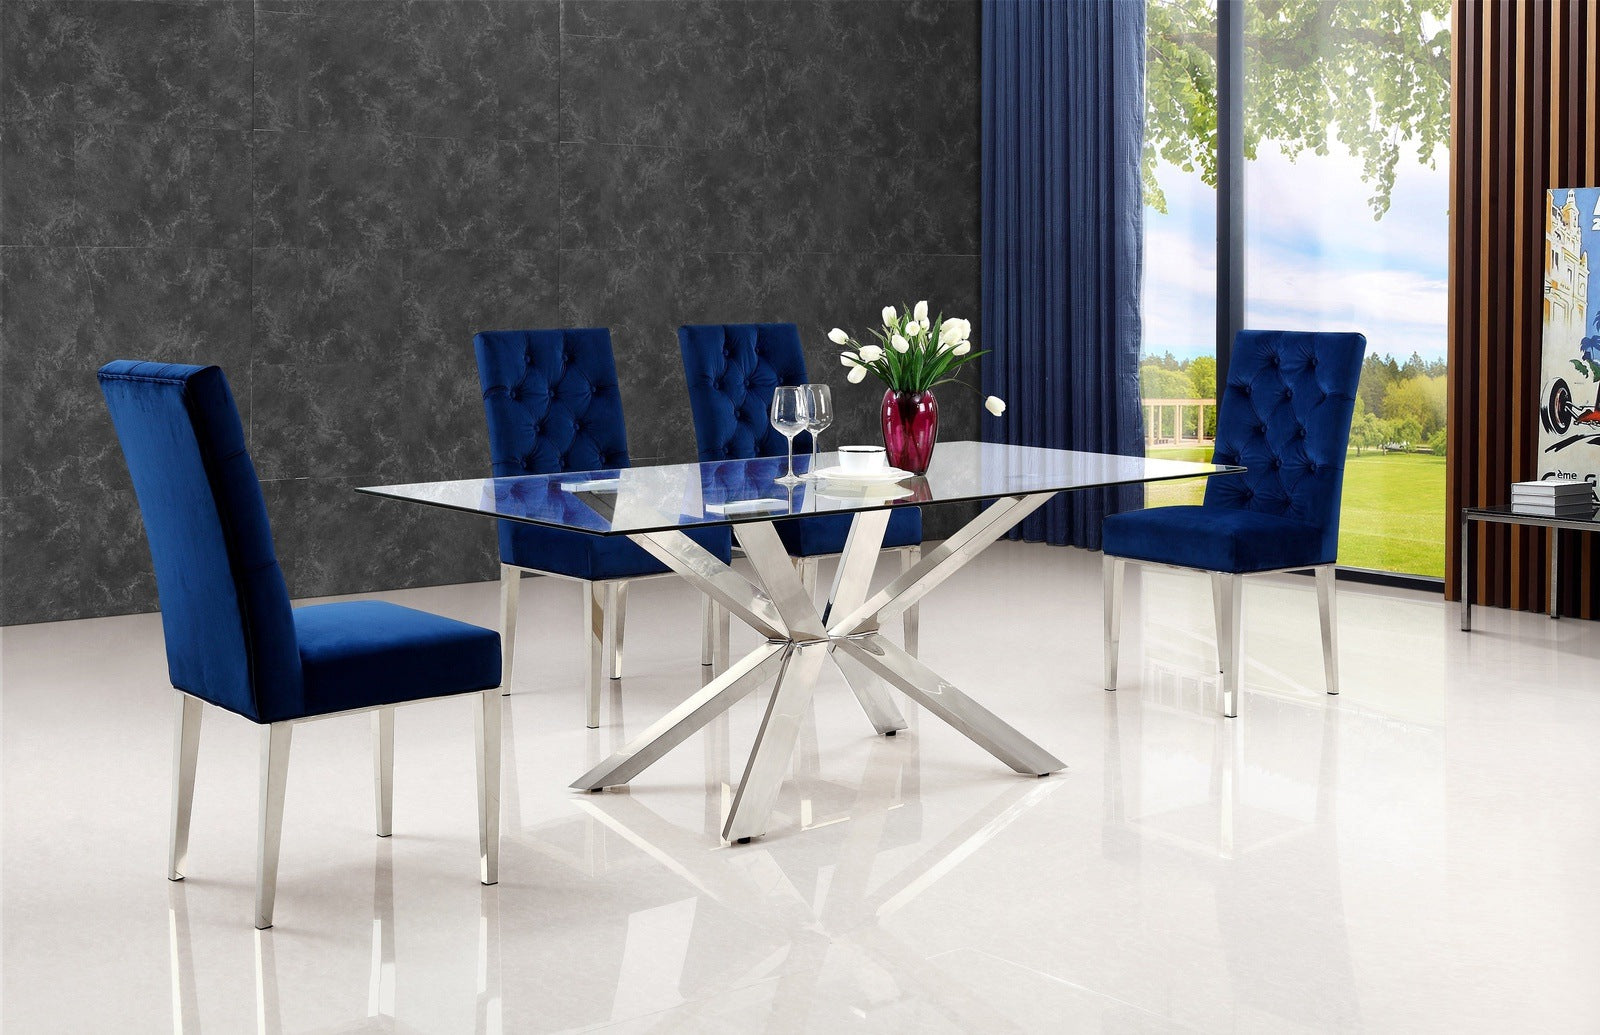 JUNO CHROME DINING TABLE + 6 CHAIRS DINING SET